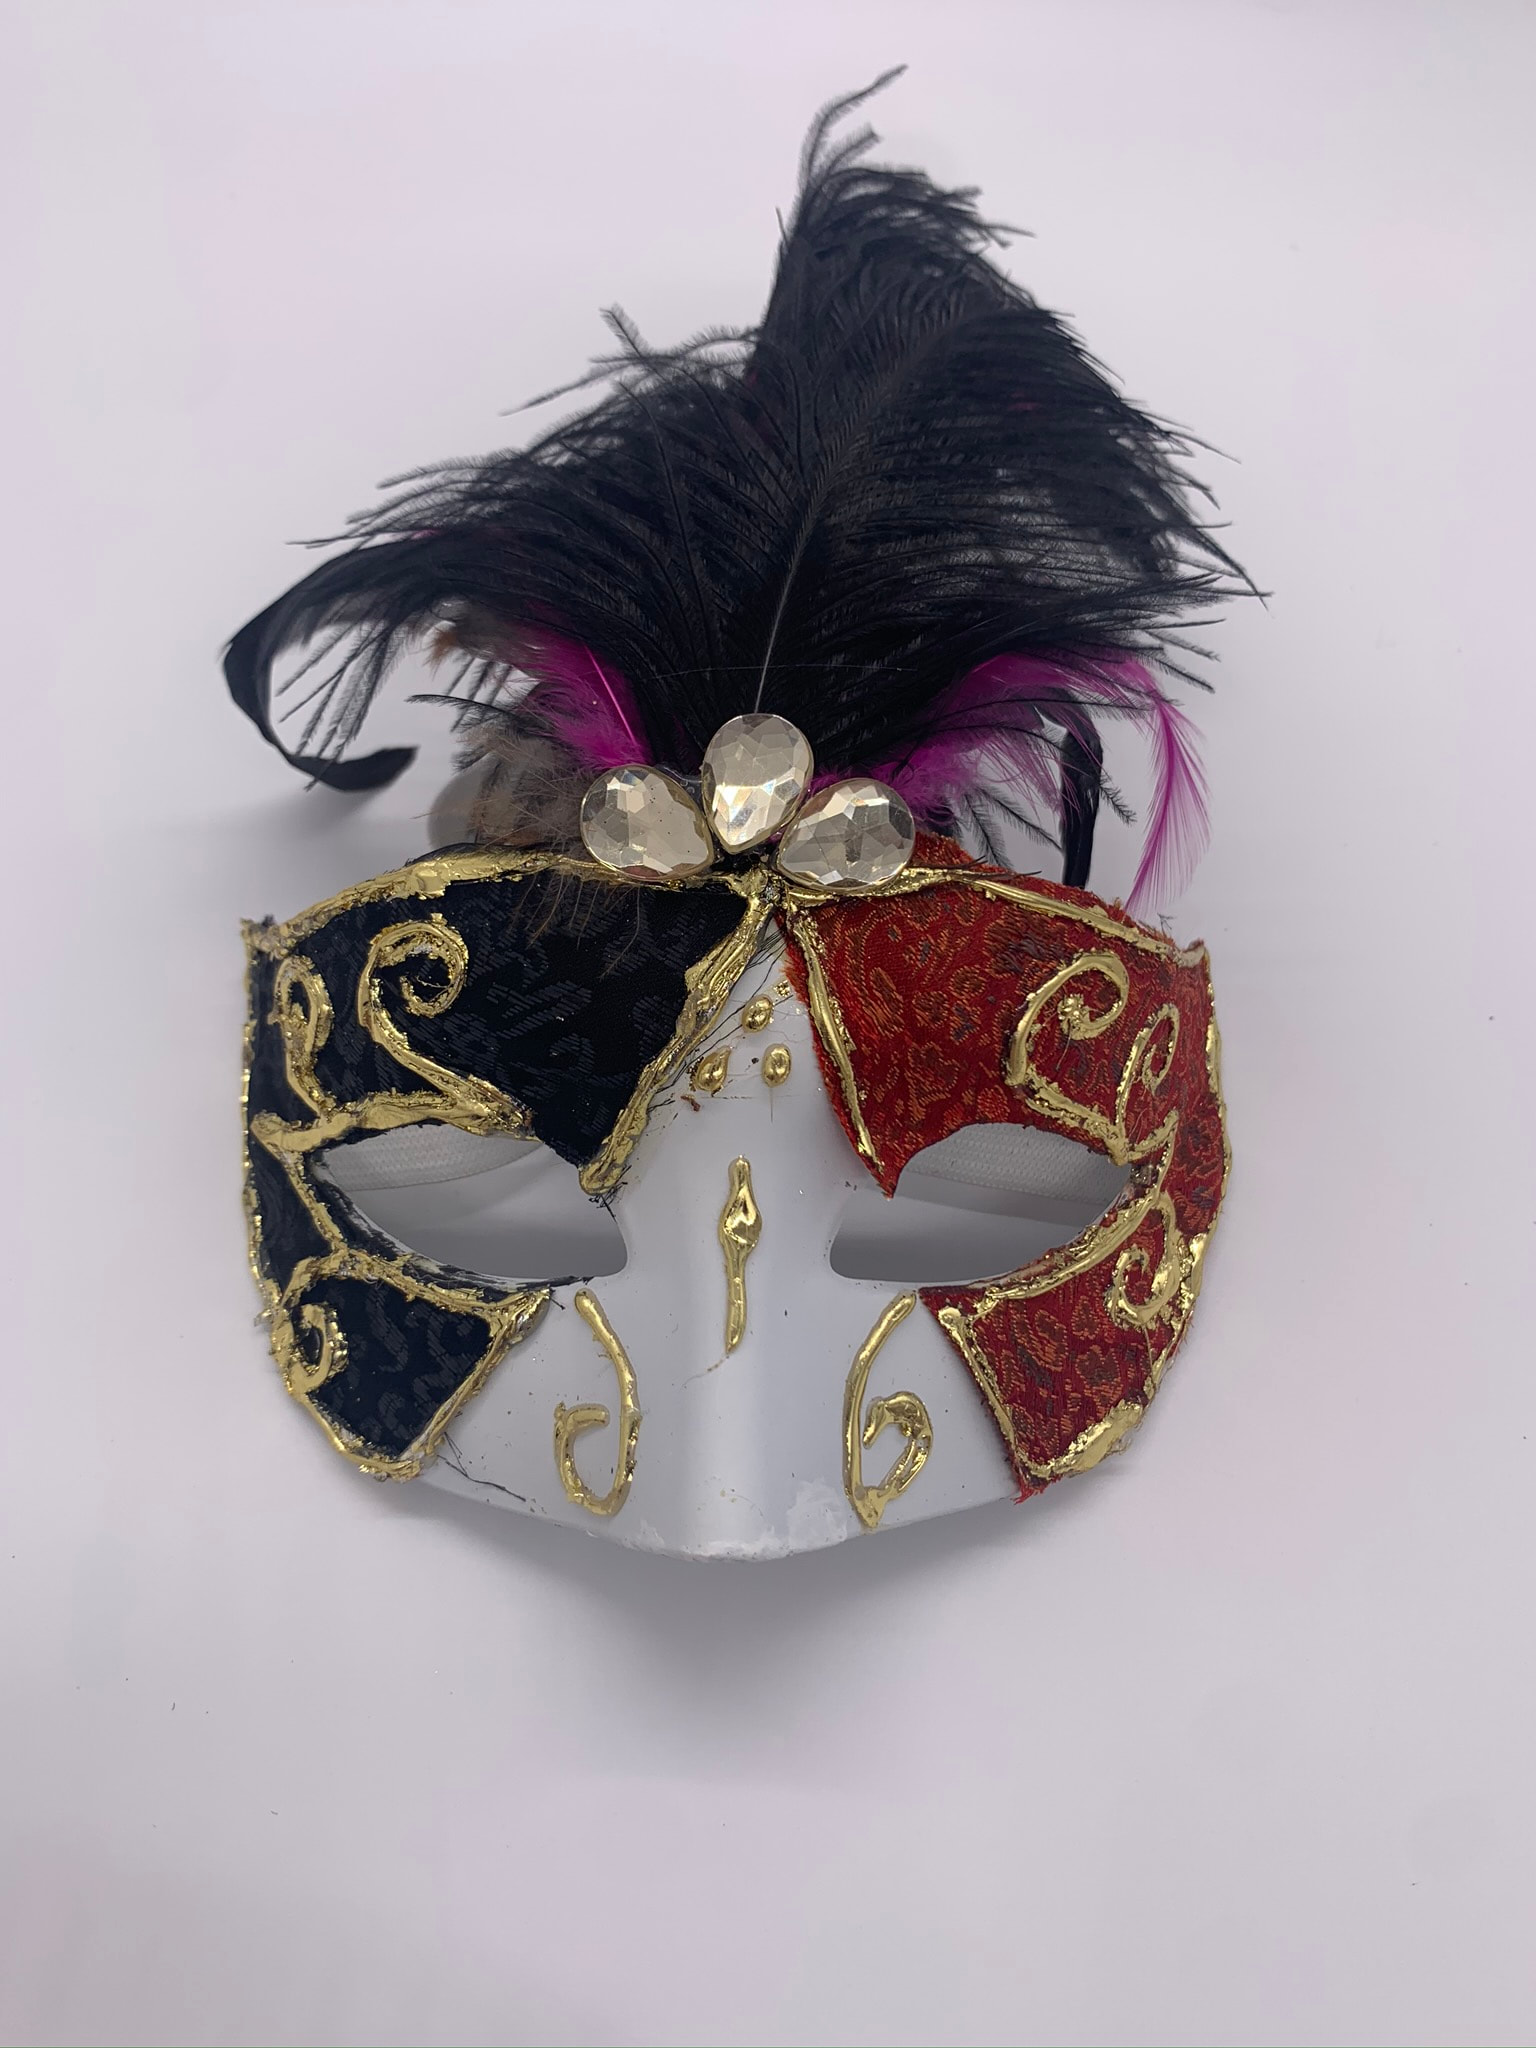 Feathered Party Mask - Plumed Venetian Mask